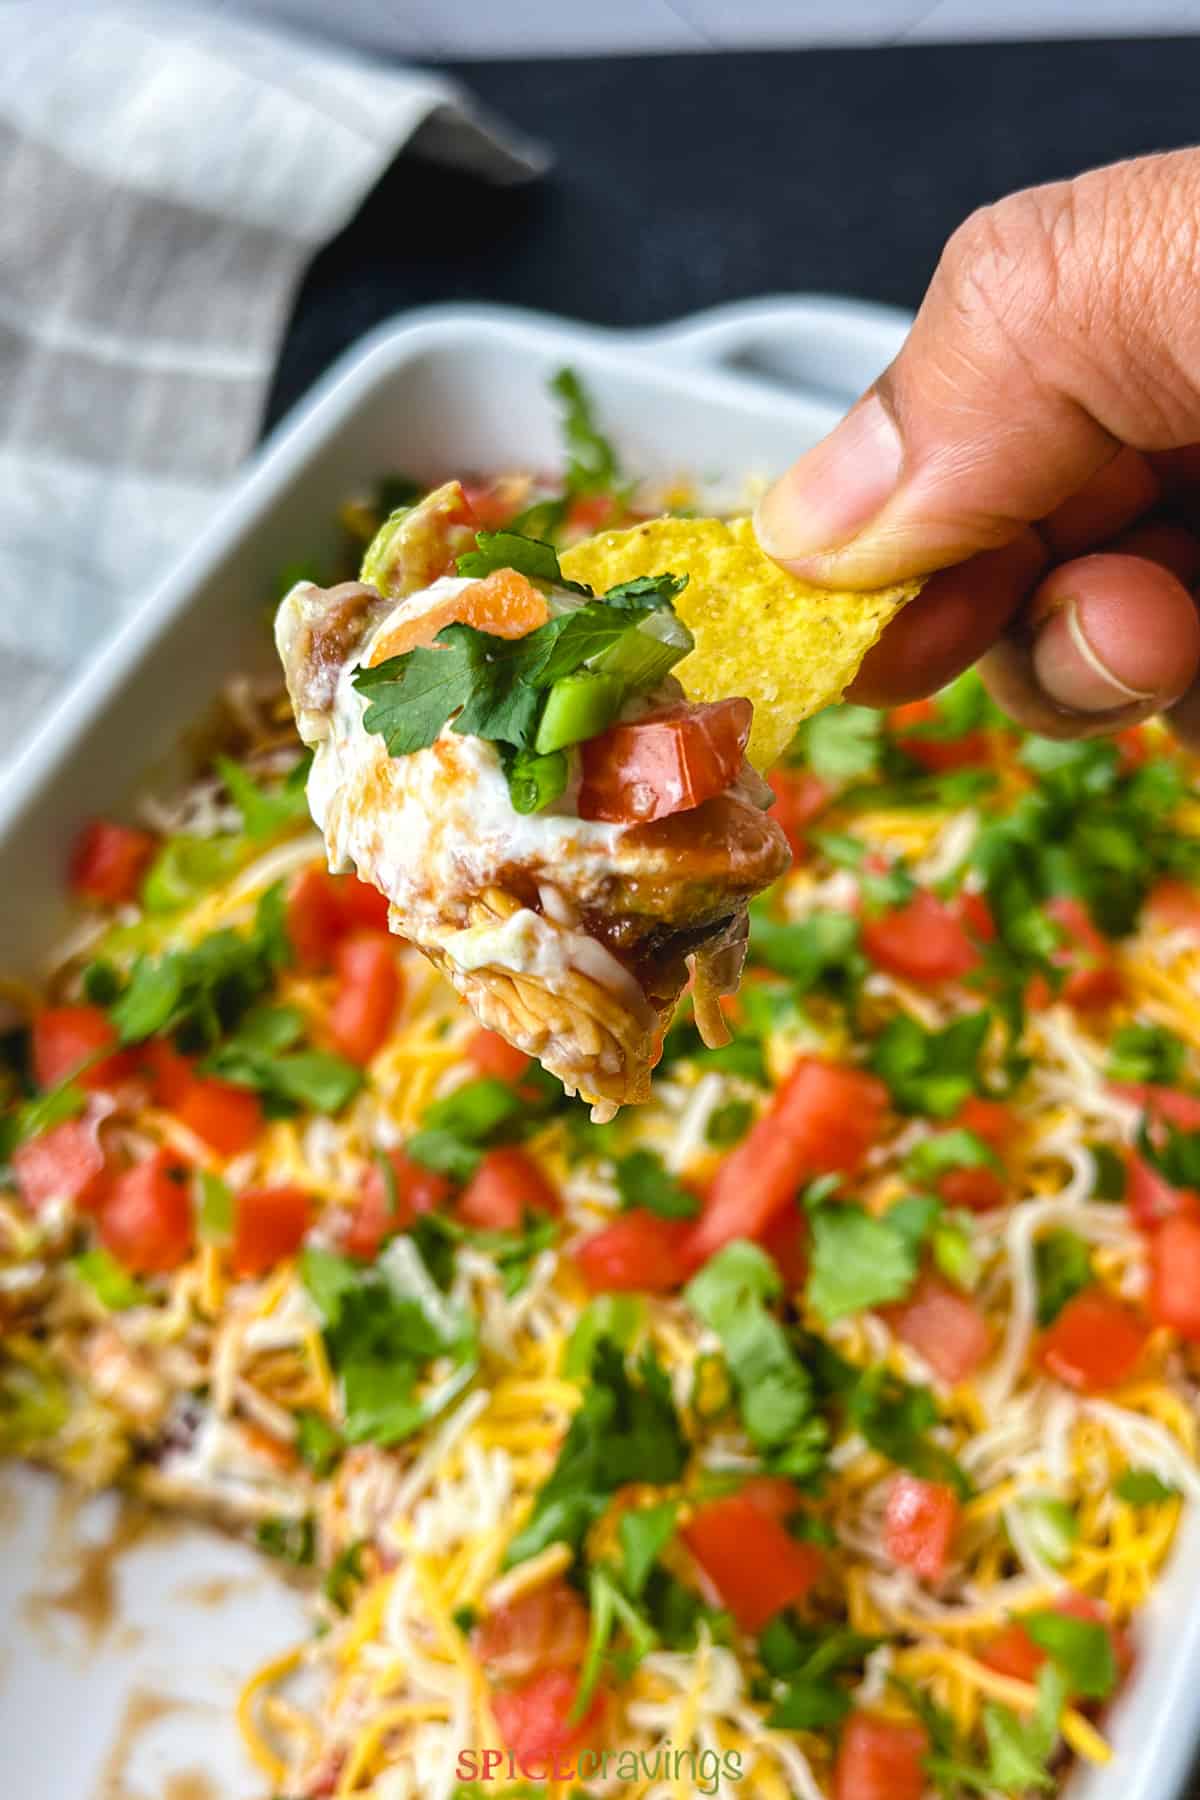 Tortilla chip loaded with layered Mexican dip with beans, tomato, sour cream